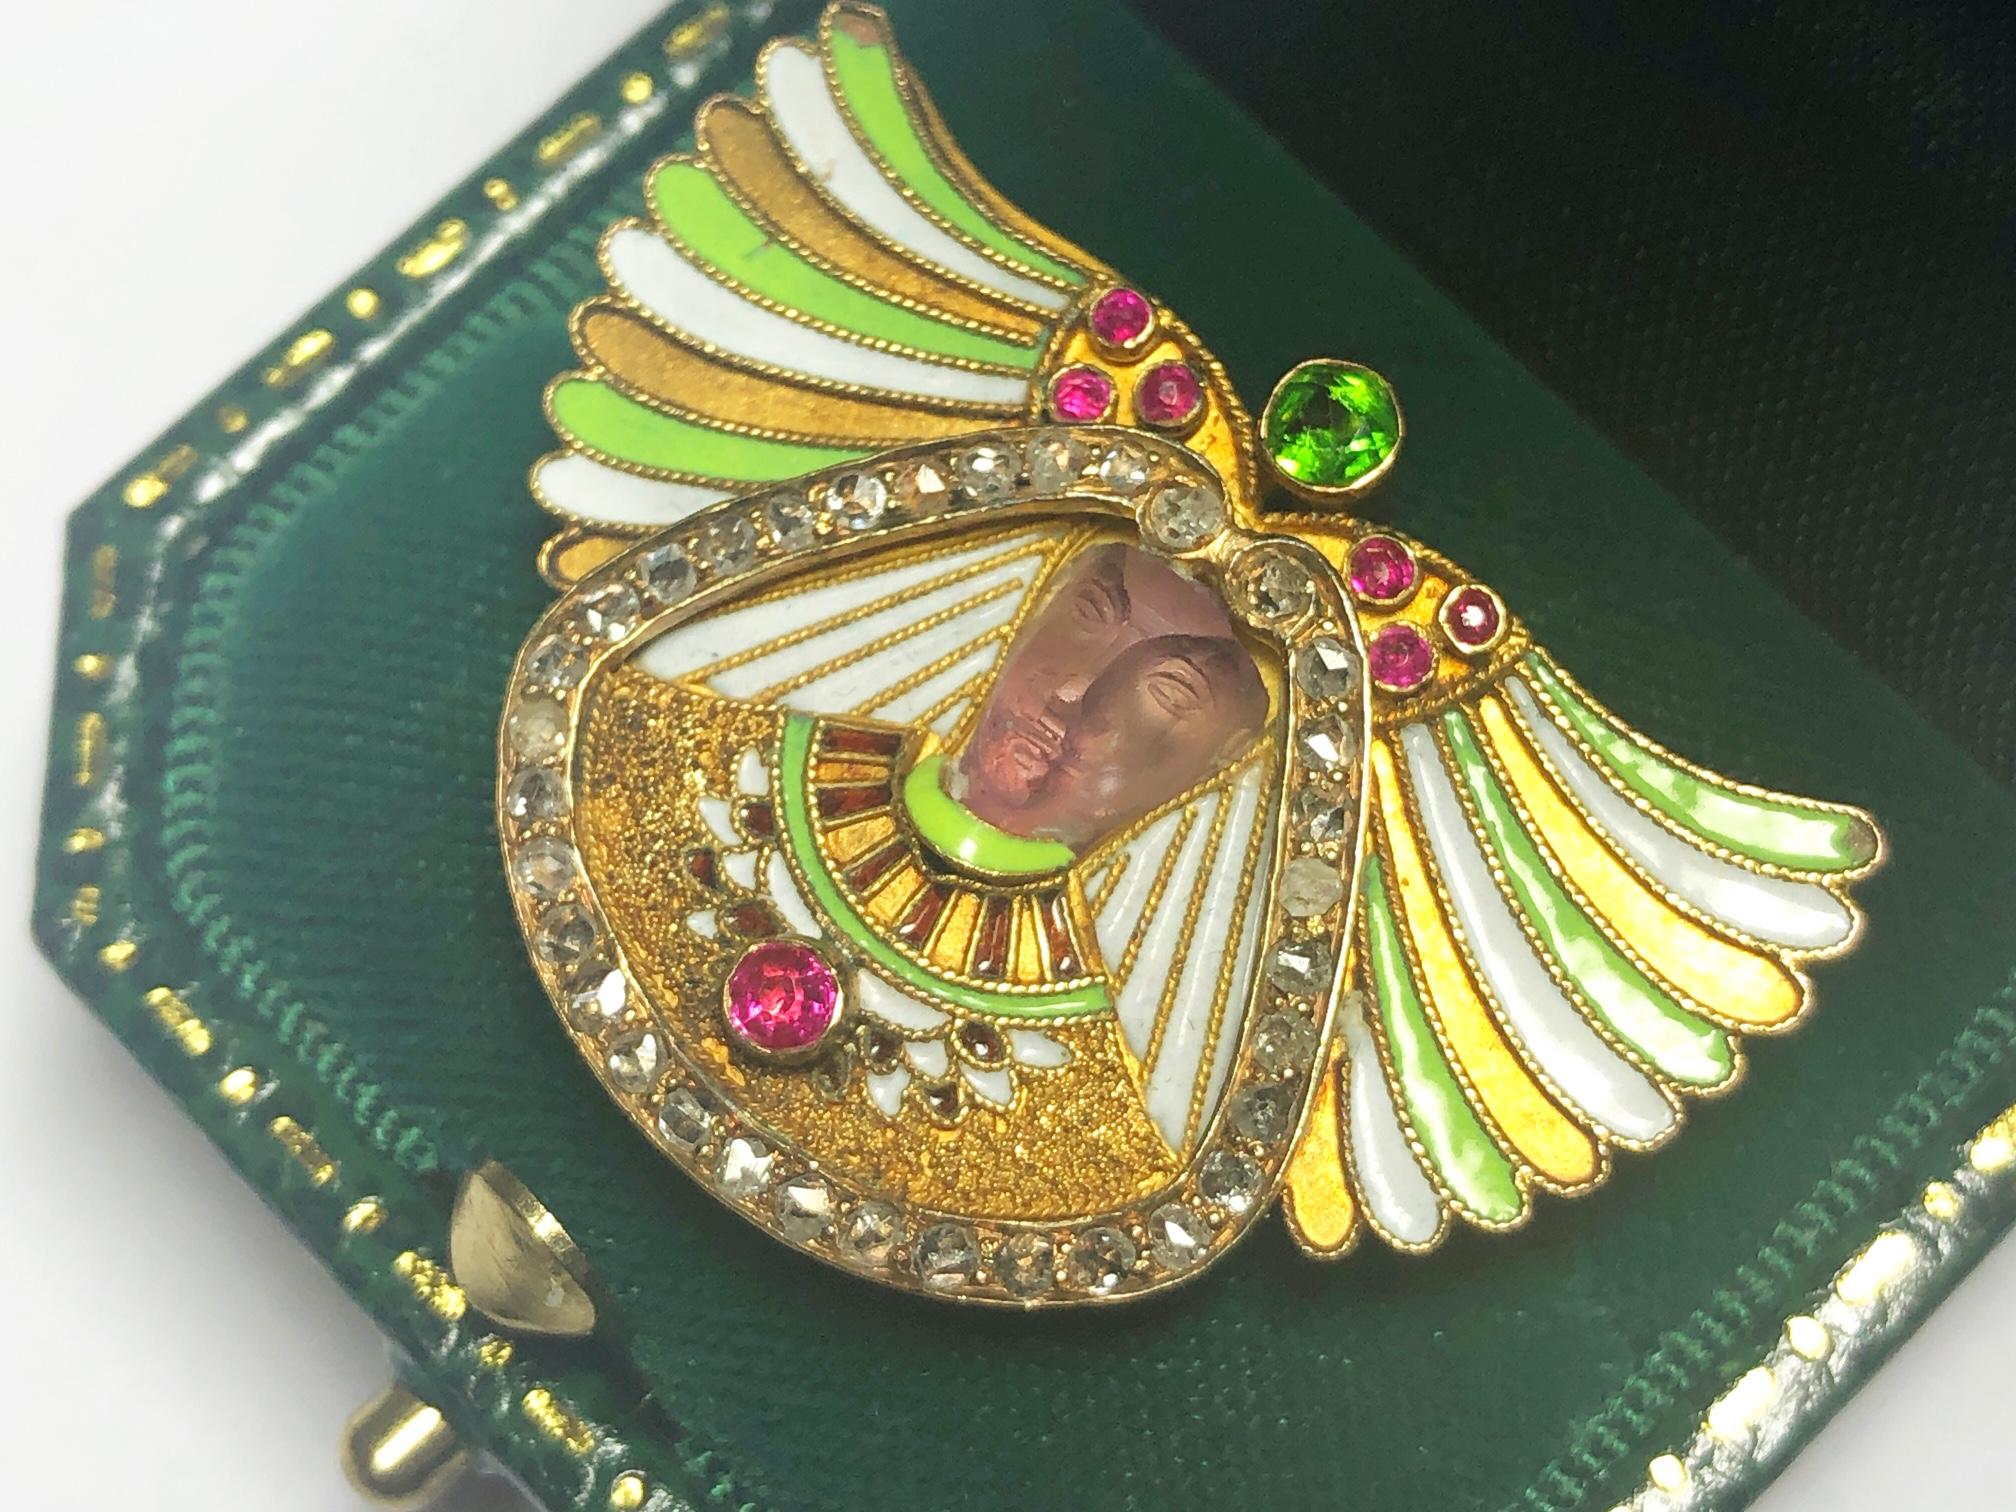 An Austro-Hungarian, Egyptian Revival, pharoah's head, gem-set brooch, with a carved amethyst head, wearing a Nemes headdress, in green and white, cloisonné enamel, with twisted wire edging, topped by round faceted rubies and a demantoid garnet, in